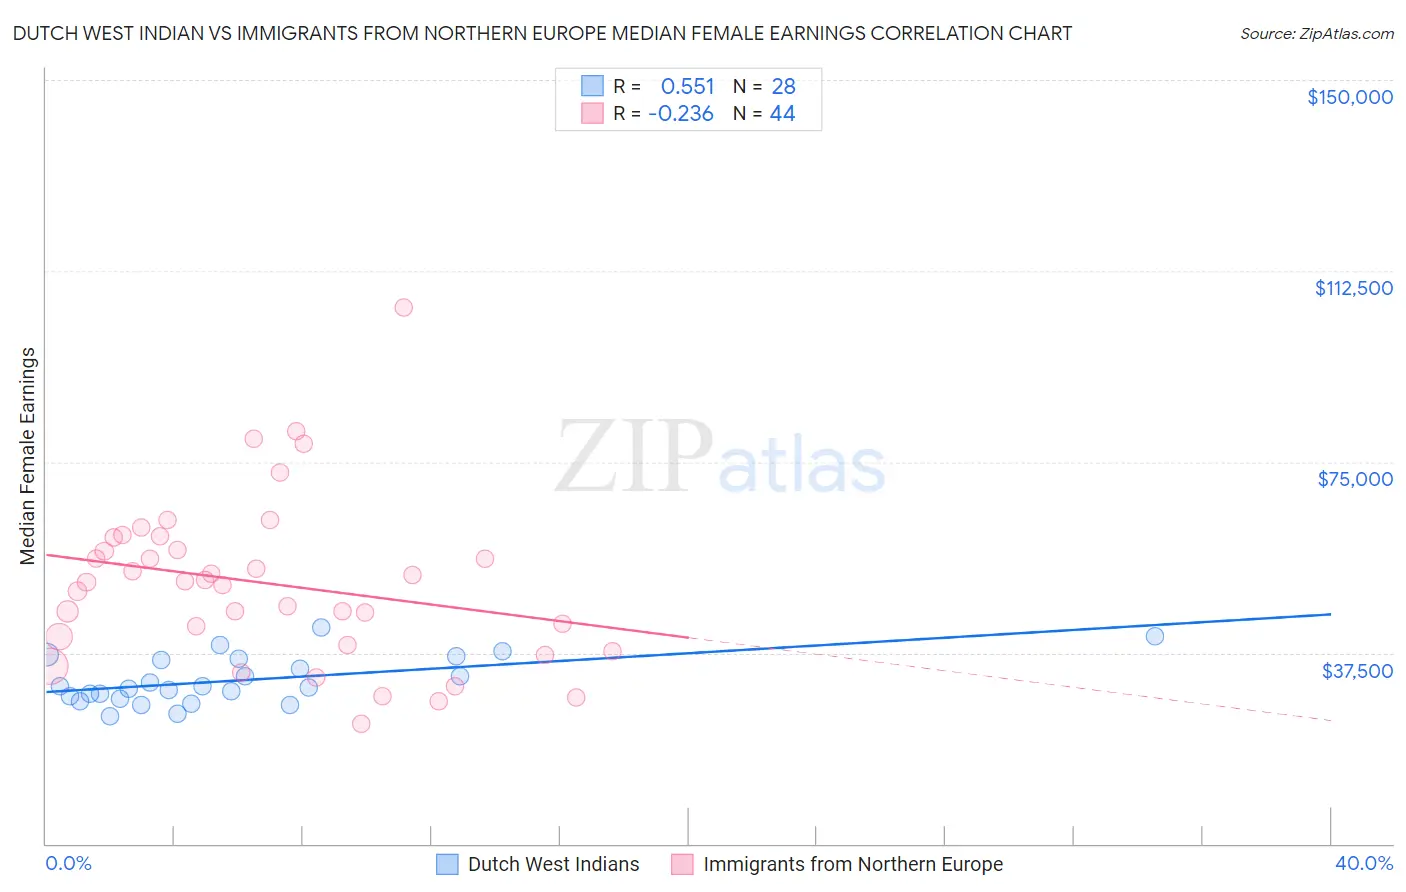 Dutch West Indian vs Immigrants from Northern Europe Median Female Earnings